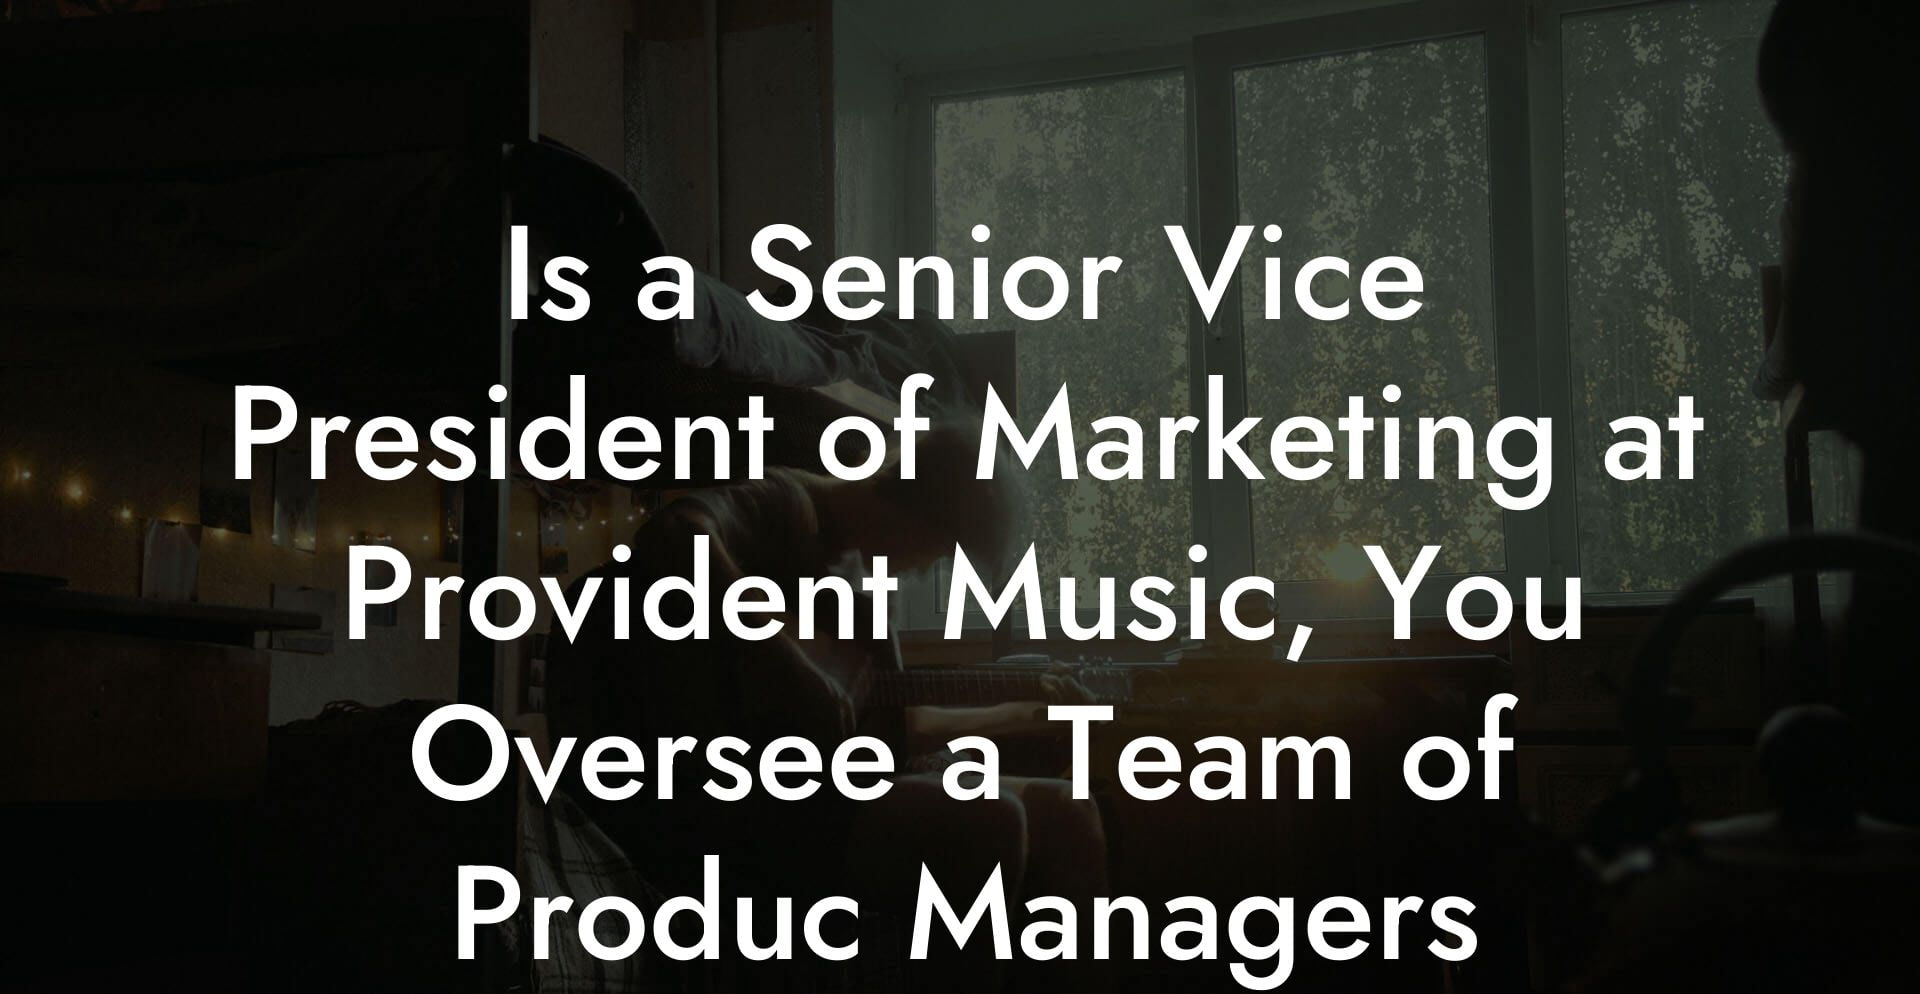 Is a Senior Vice President of Marketing at Provident Music, You Oversee a Team of Produc Managers